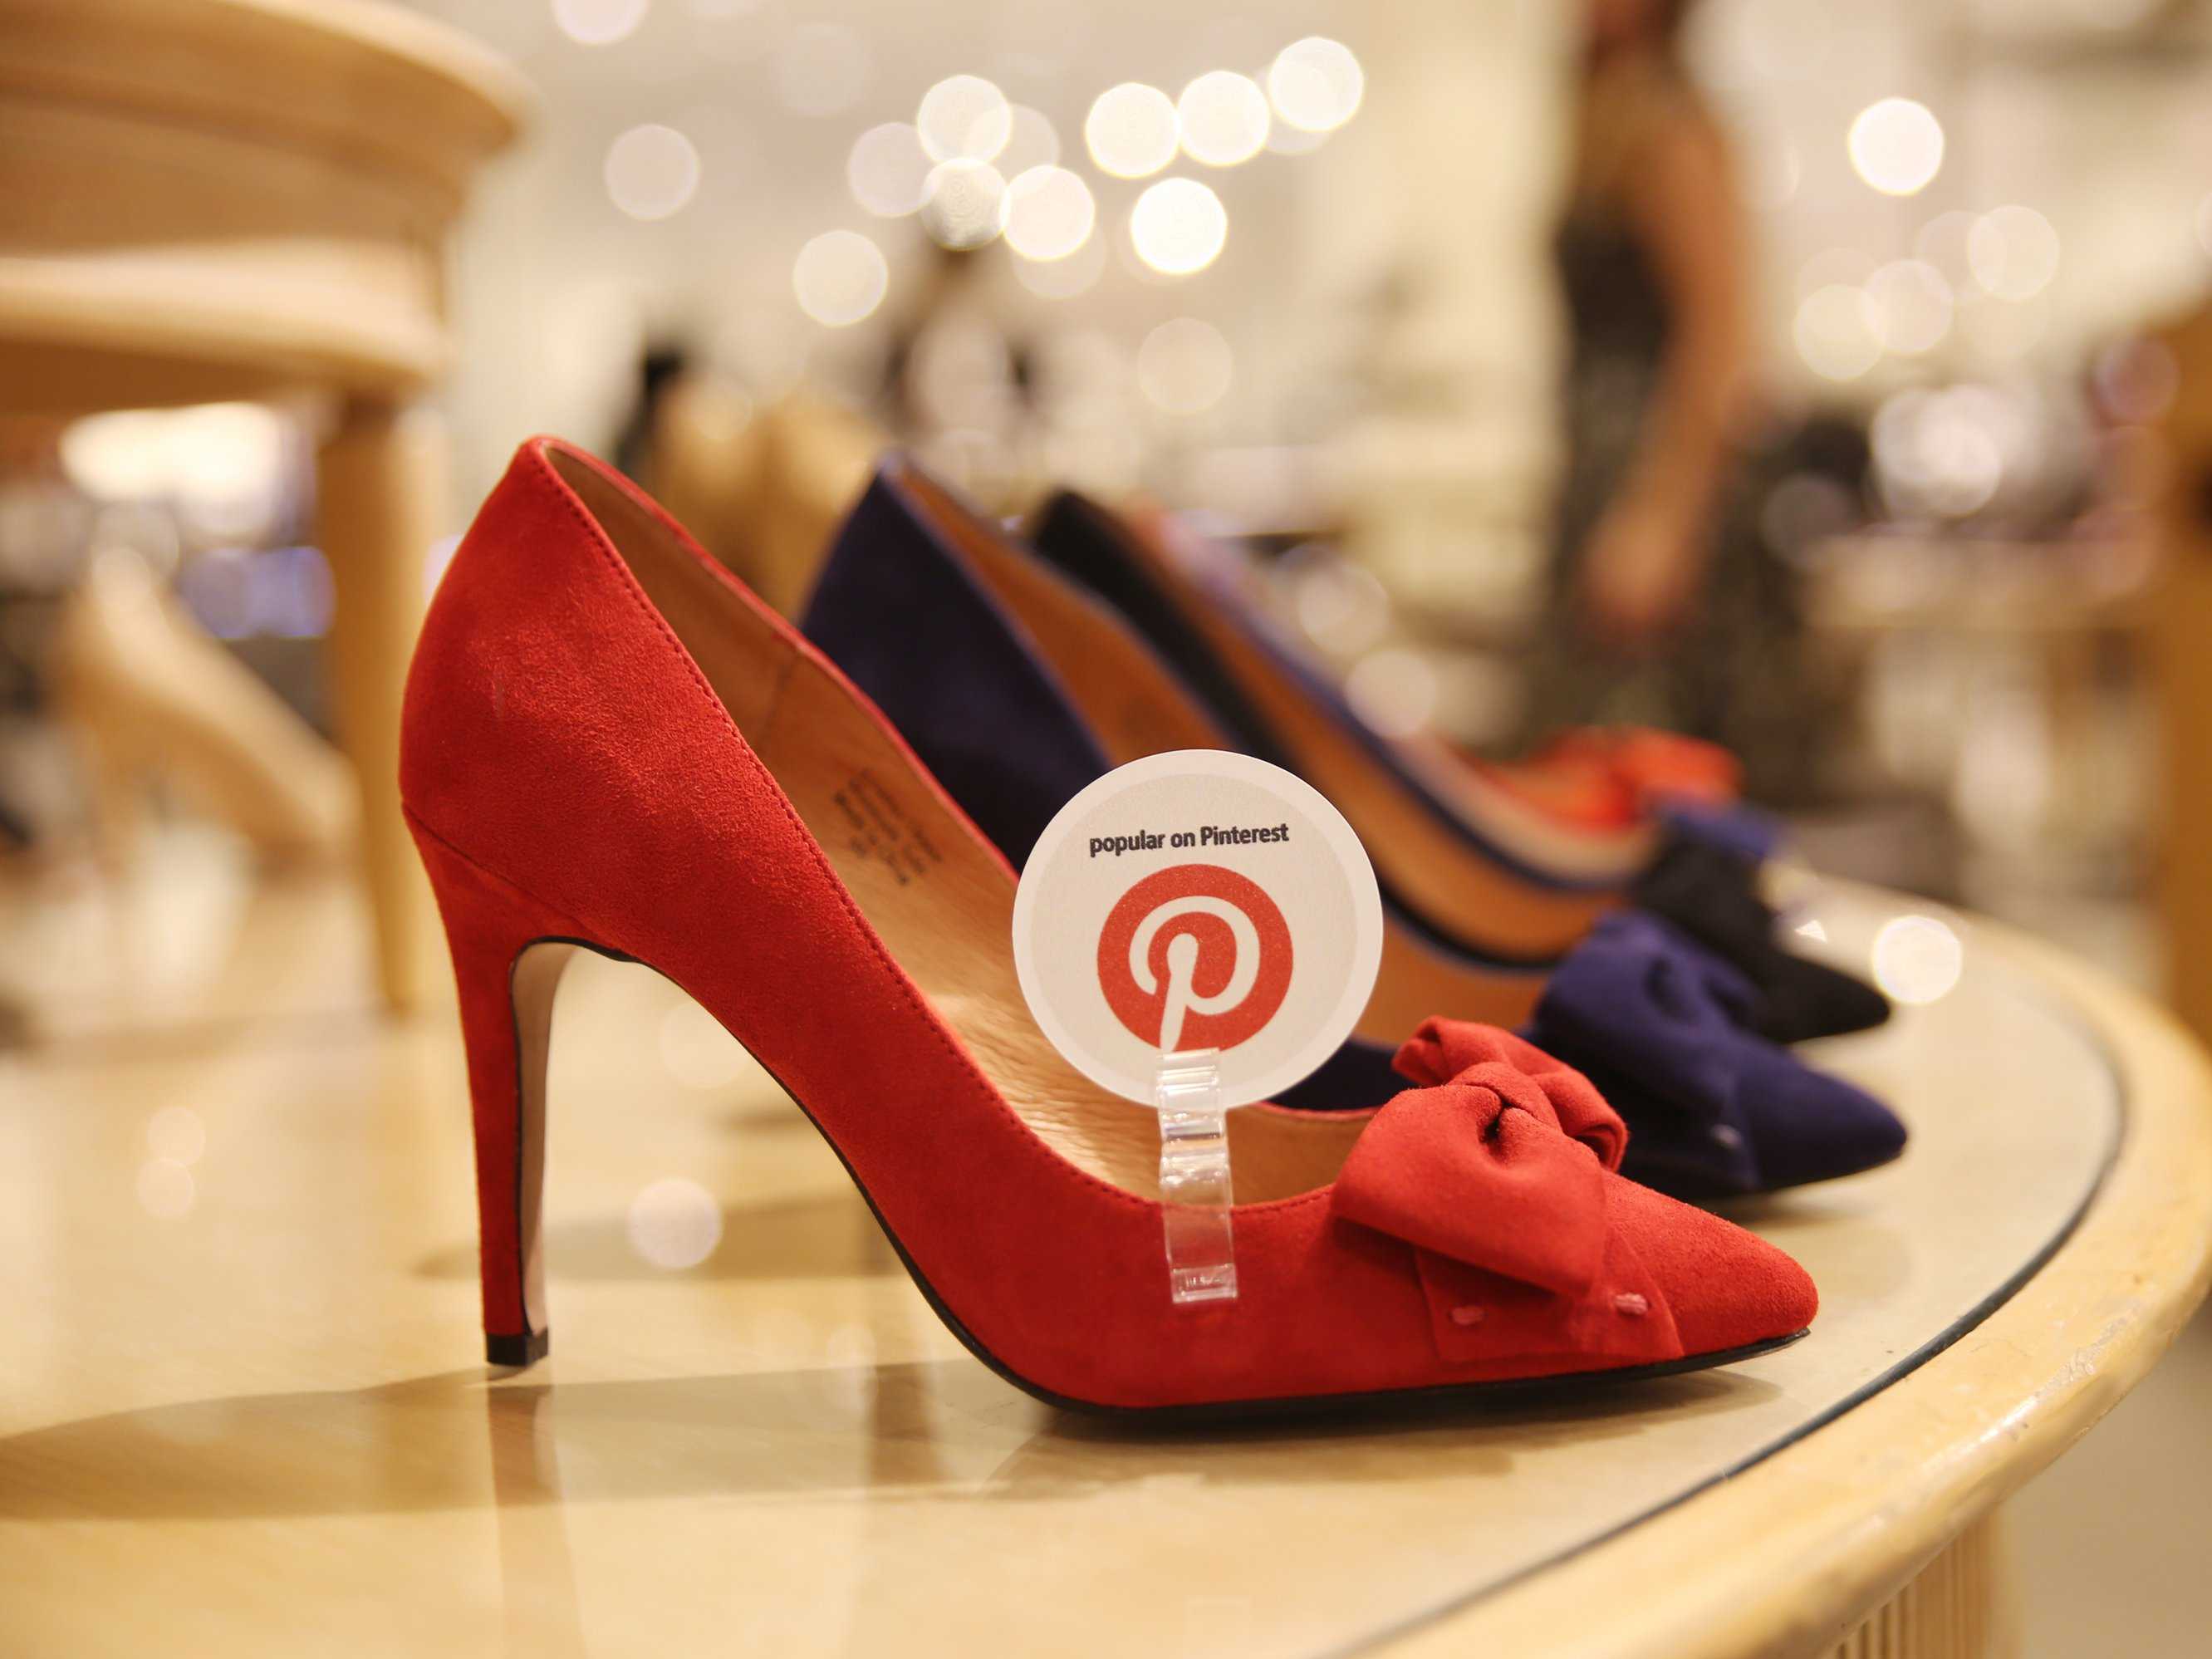 nordstrom-will-use-pinterest-to-decide-what-merchandise-to-display-in-stores